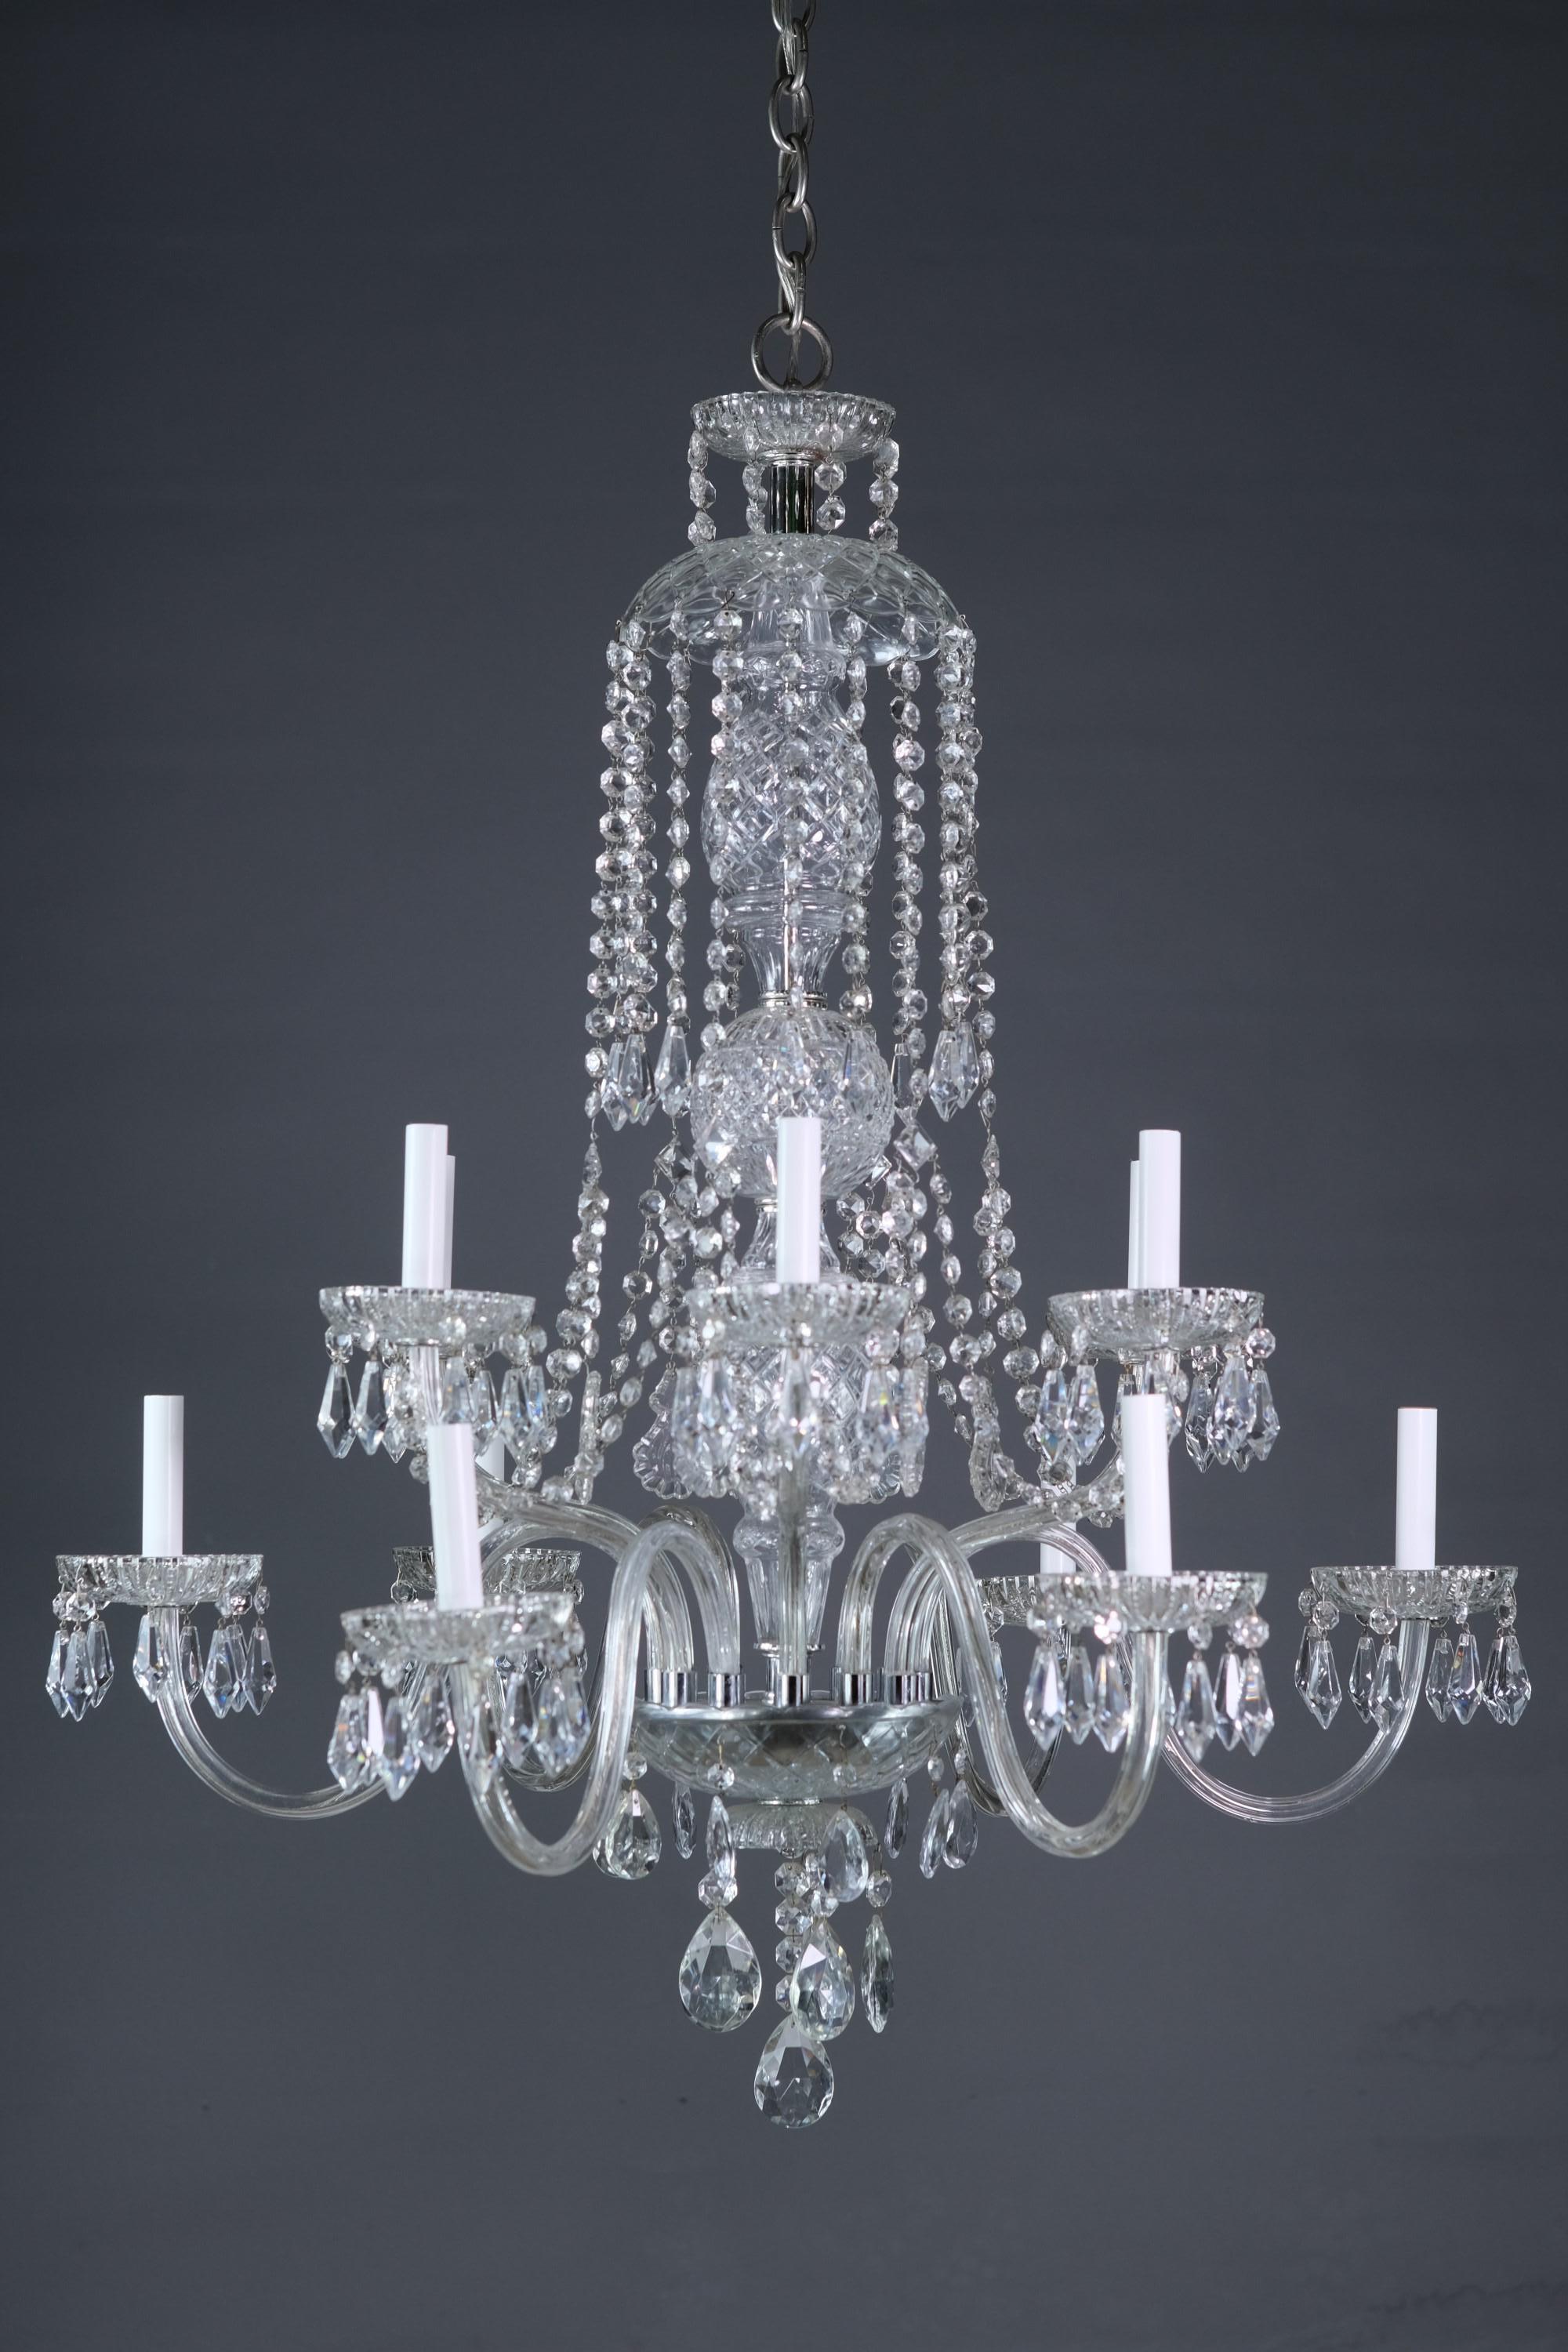 Original to the NYC Plaza Hotel, Beaux Arts crystal chandelier with 10 arms, cut glass bobeches and elaborate quantity of crystals and beads. Cleaned and restored. Small quantity available at time of posting. Please inquire. Priced each. Please